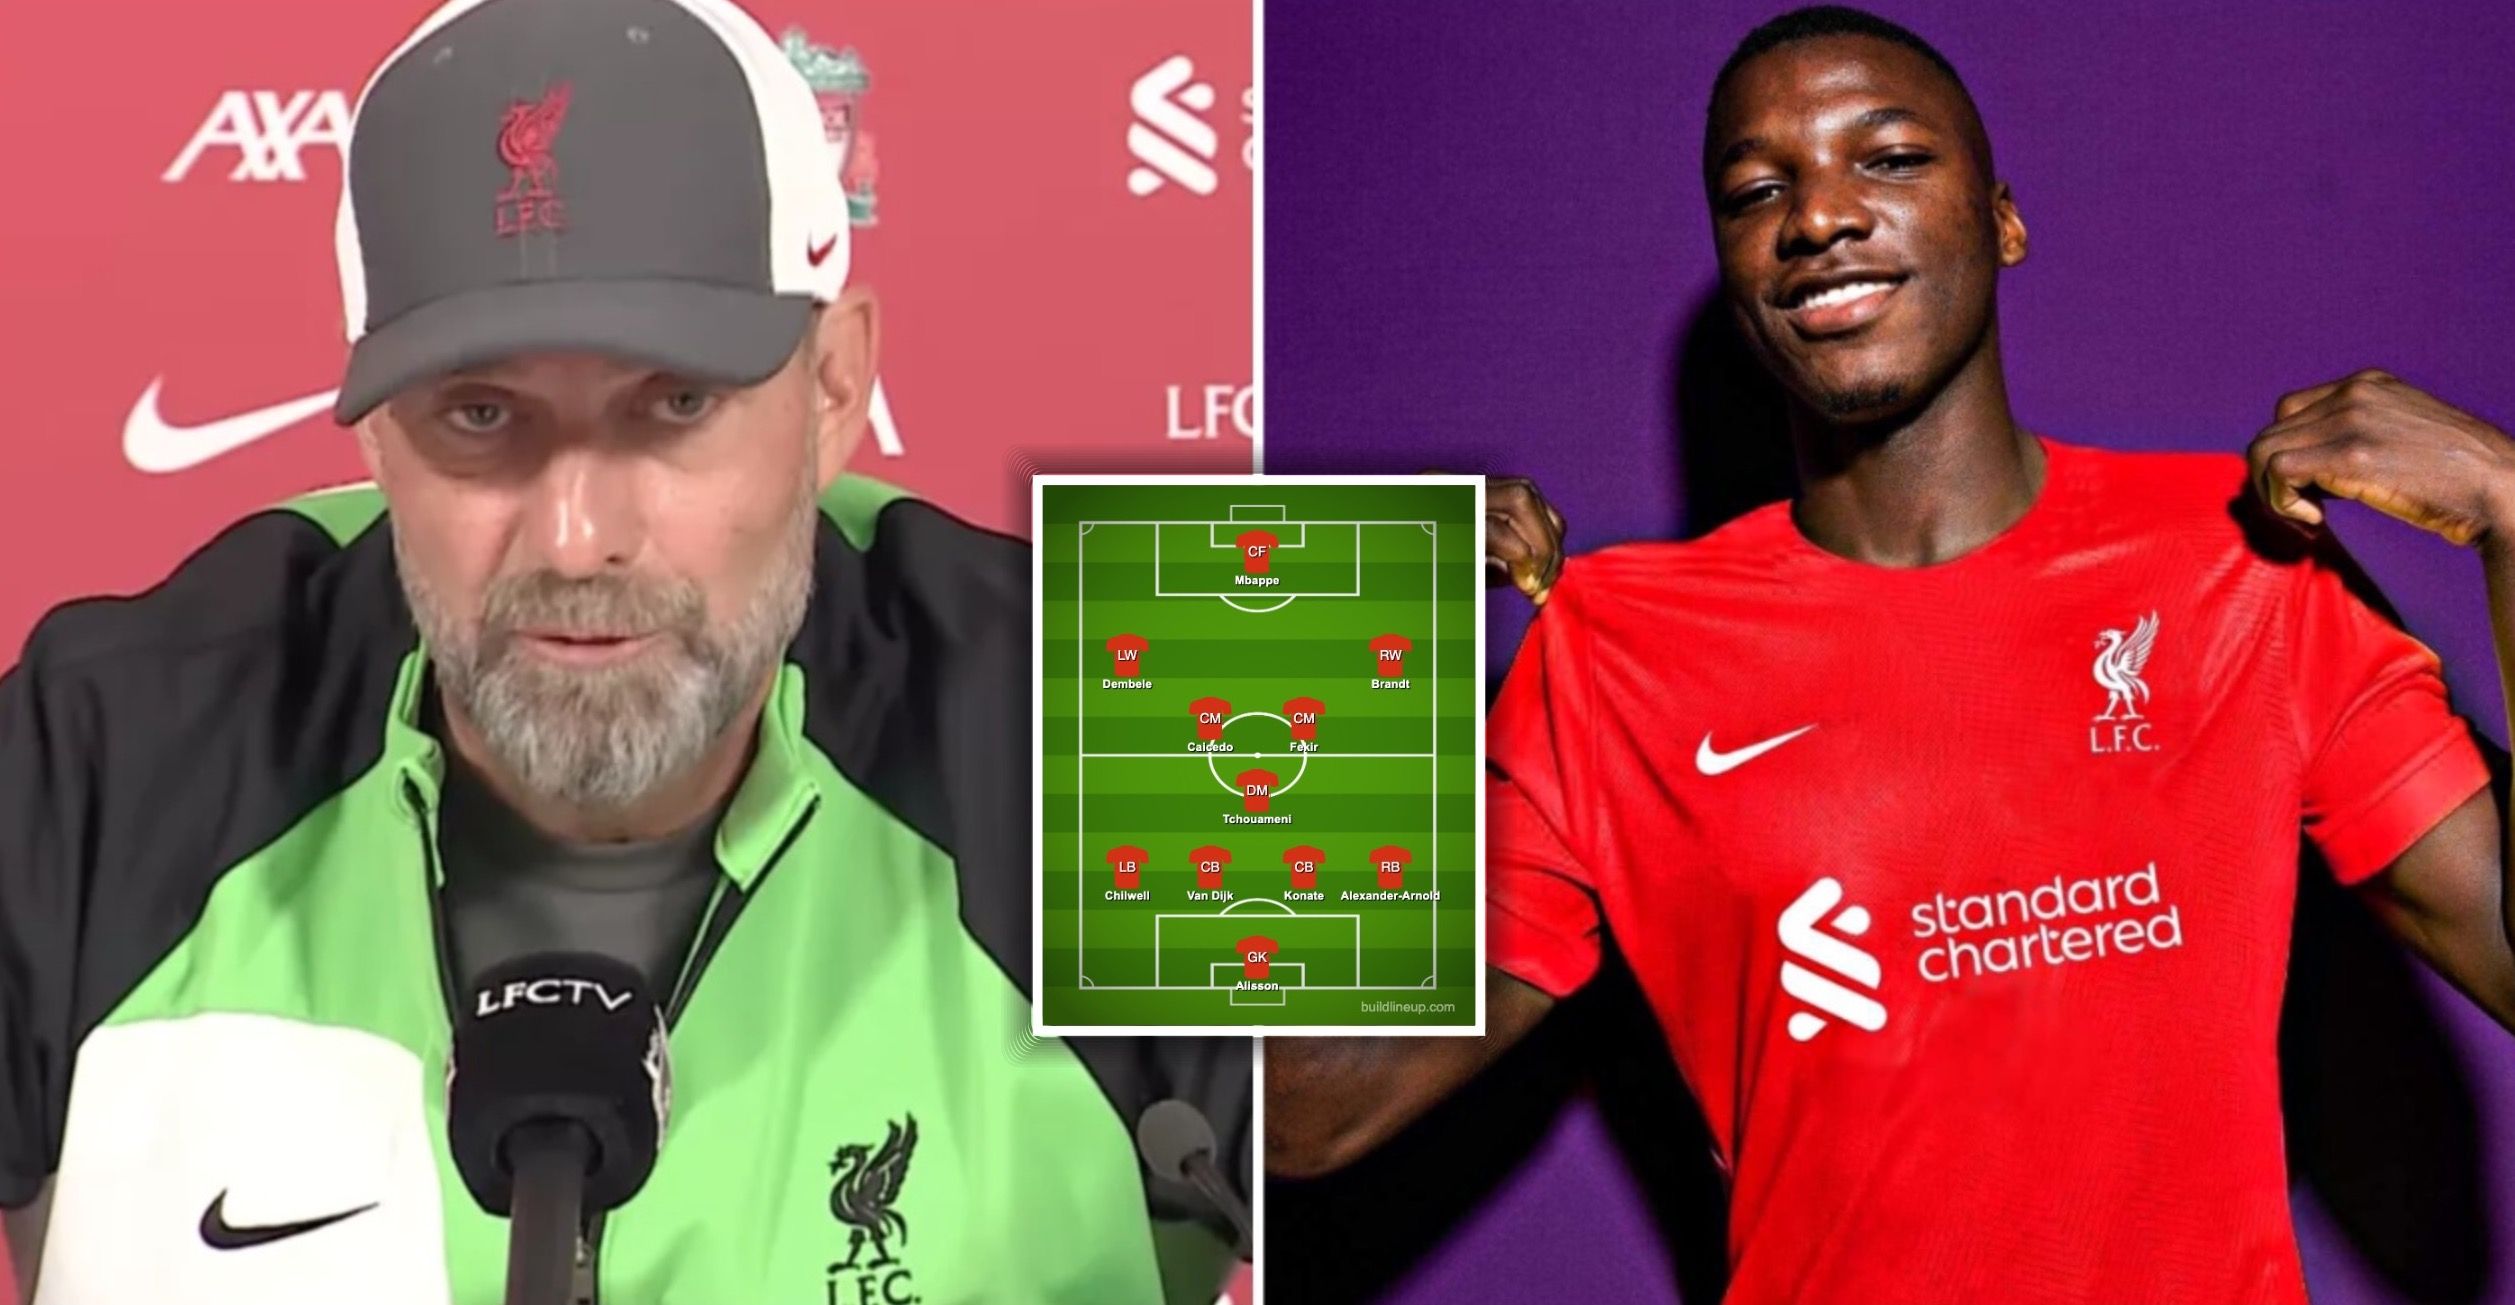 FIFA World Cup may just have highlighted wildcard future Jürgen Klopp heir  for Liverpool 